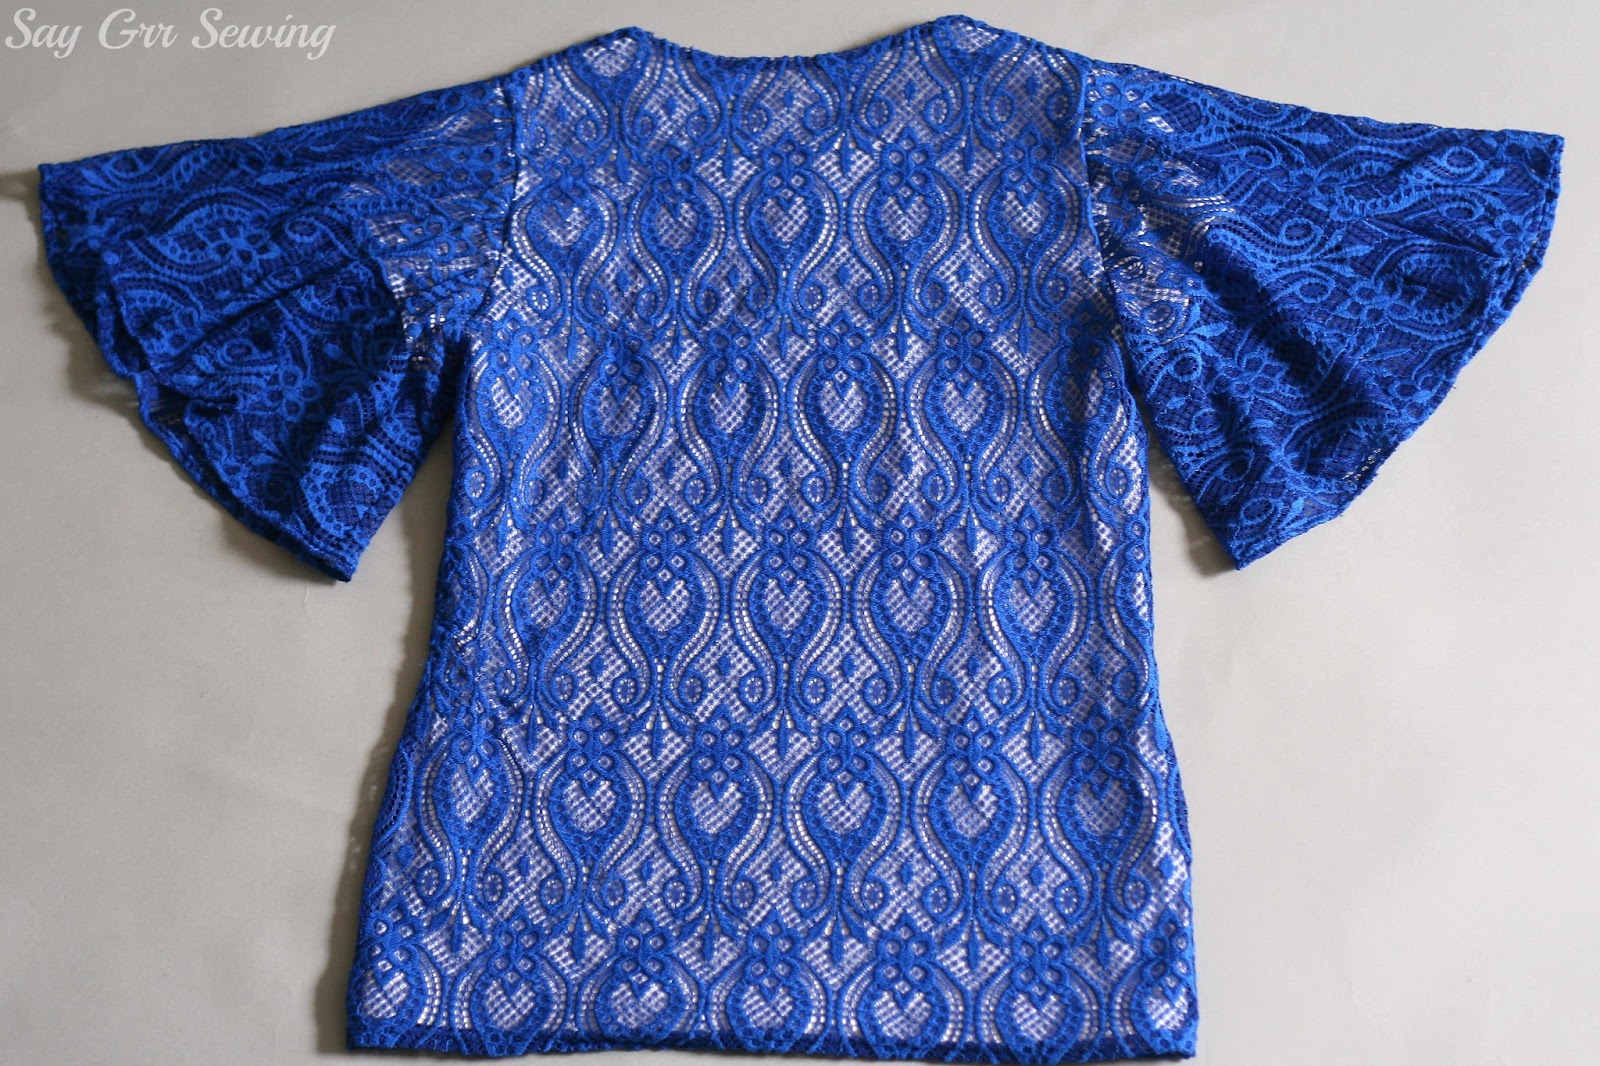 Say Grr Sewing: Lace Angel-Sleeve Top